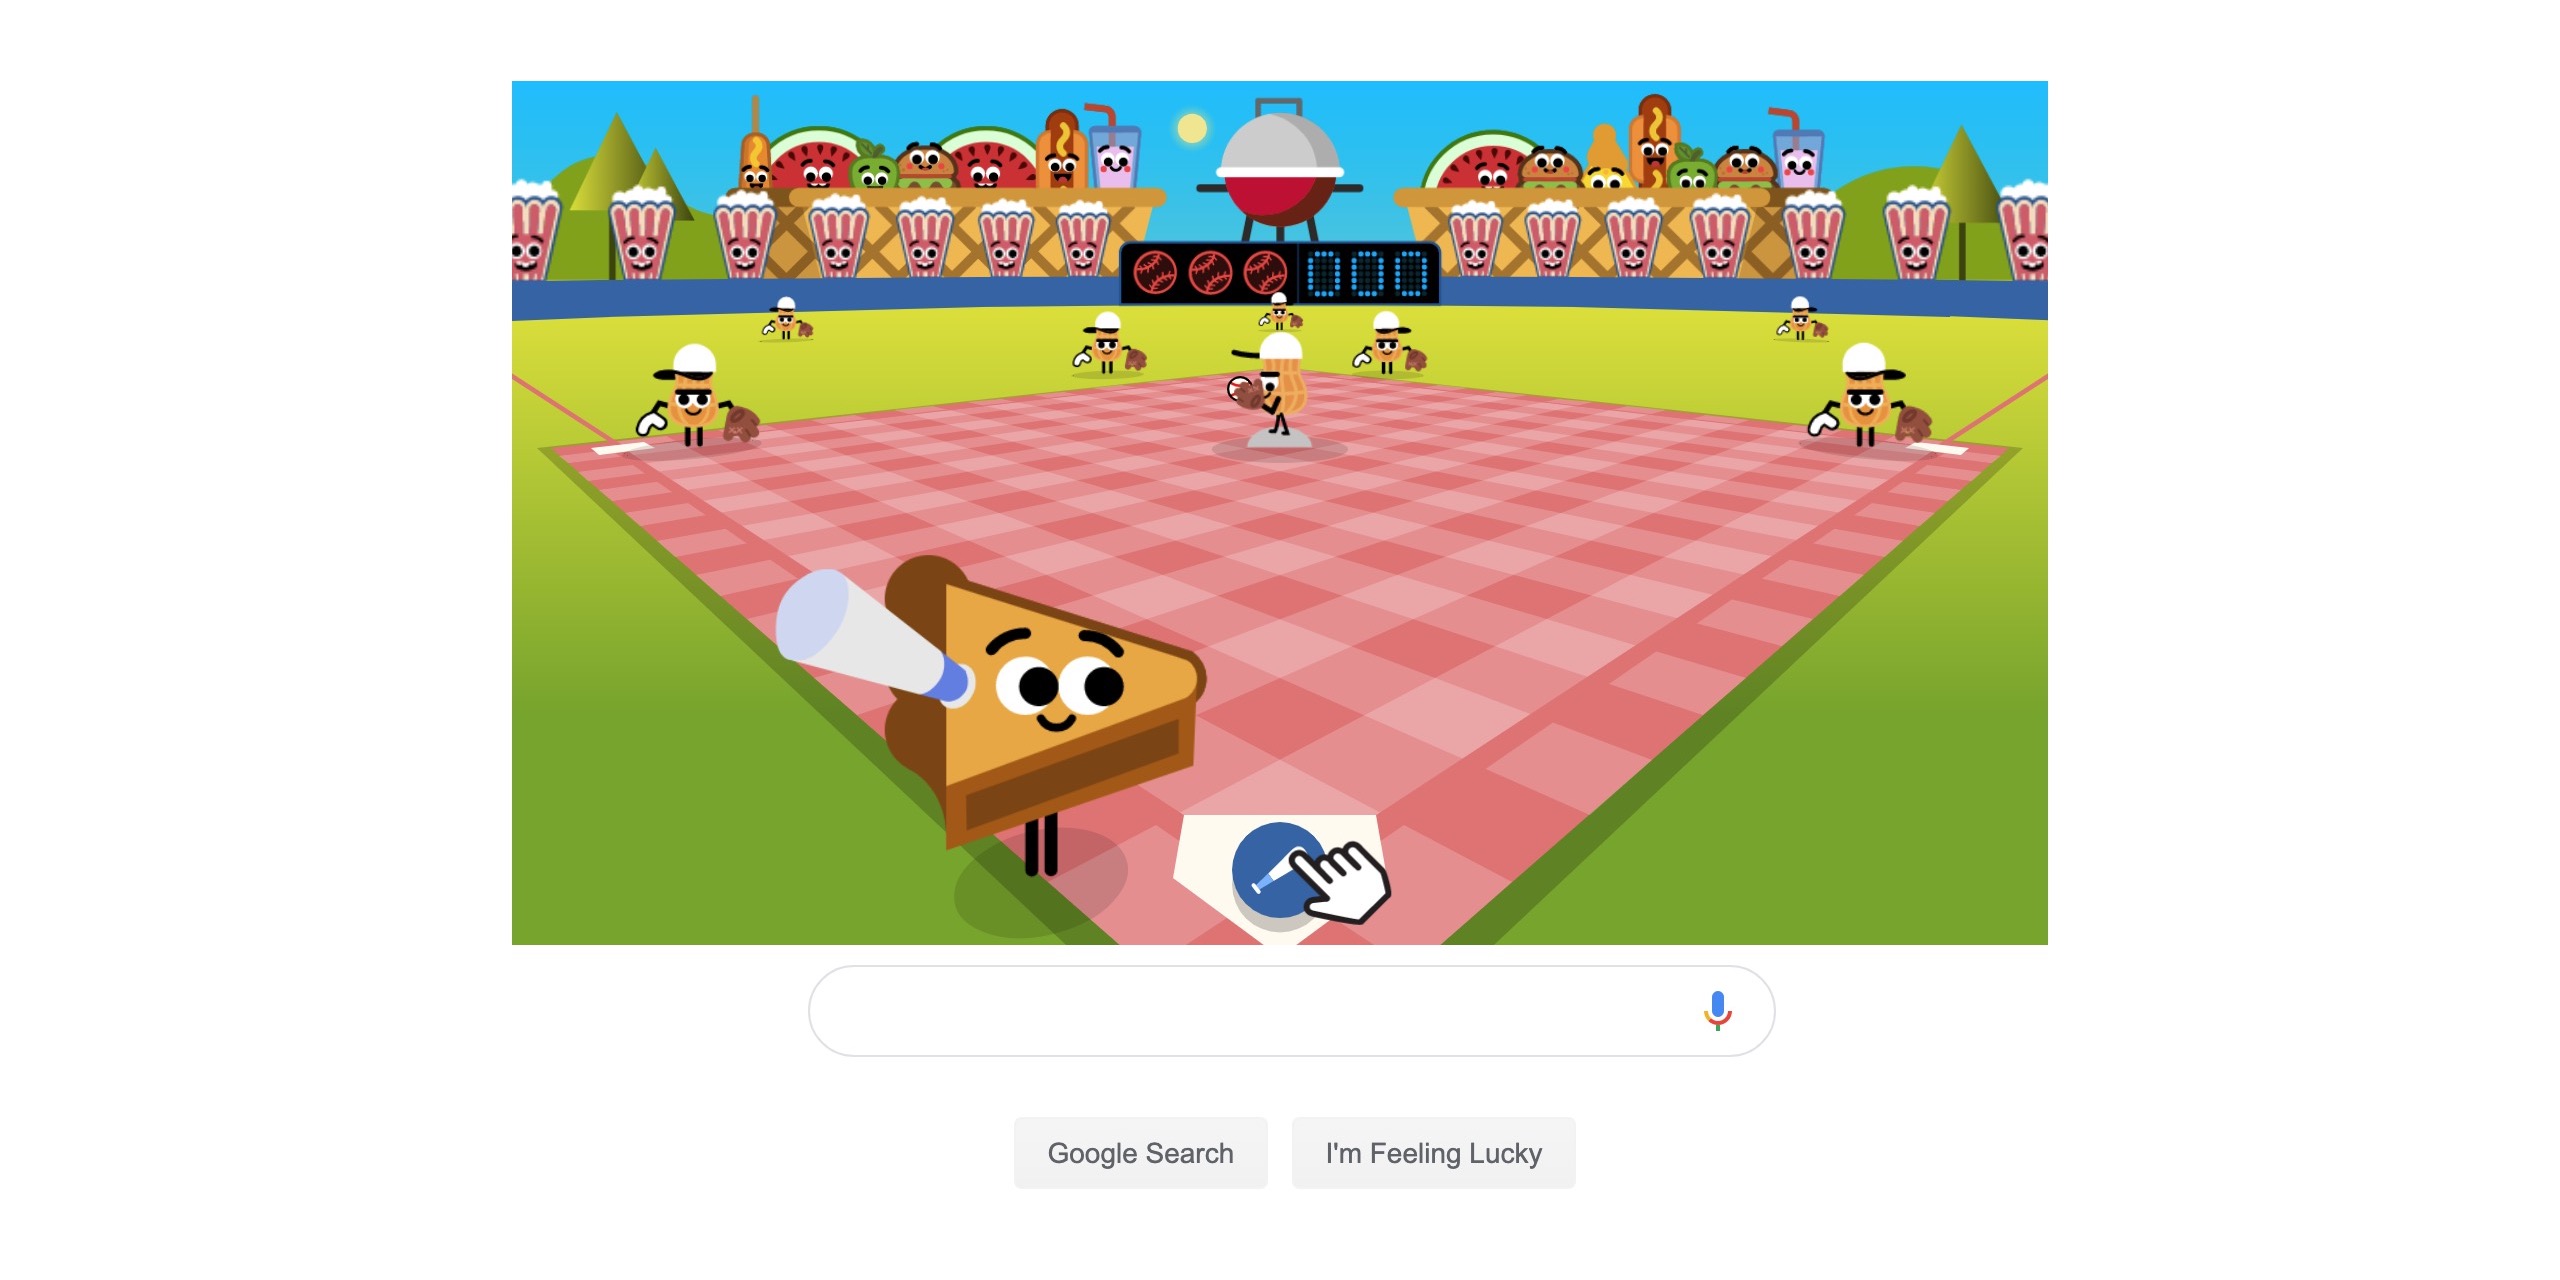 Google's 'Fourth of July' Doodle is a BBQ baseball game - 9to5Google